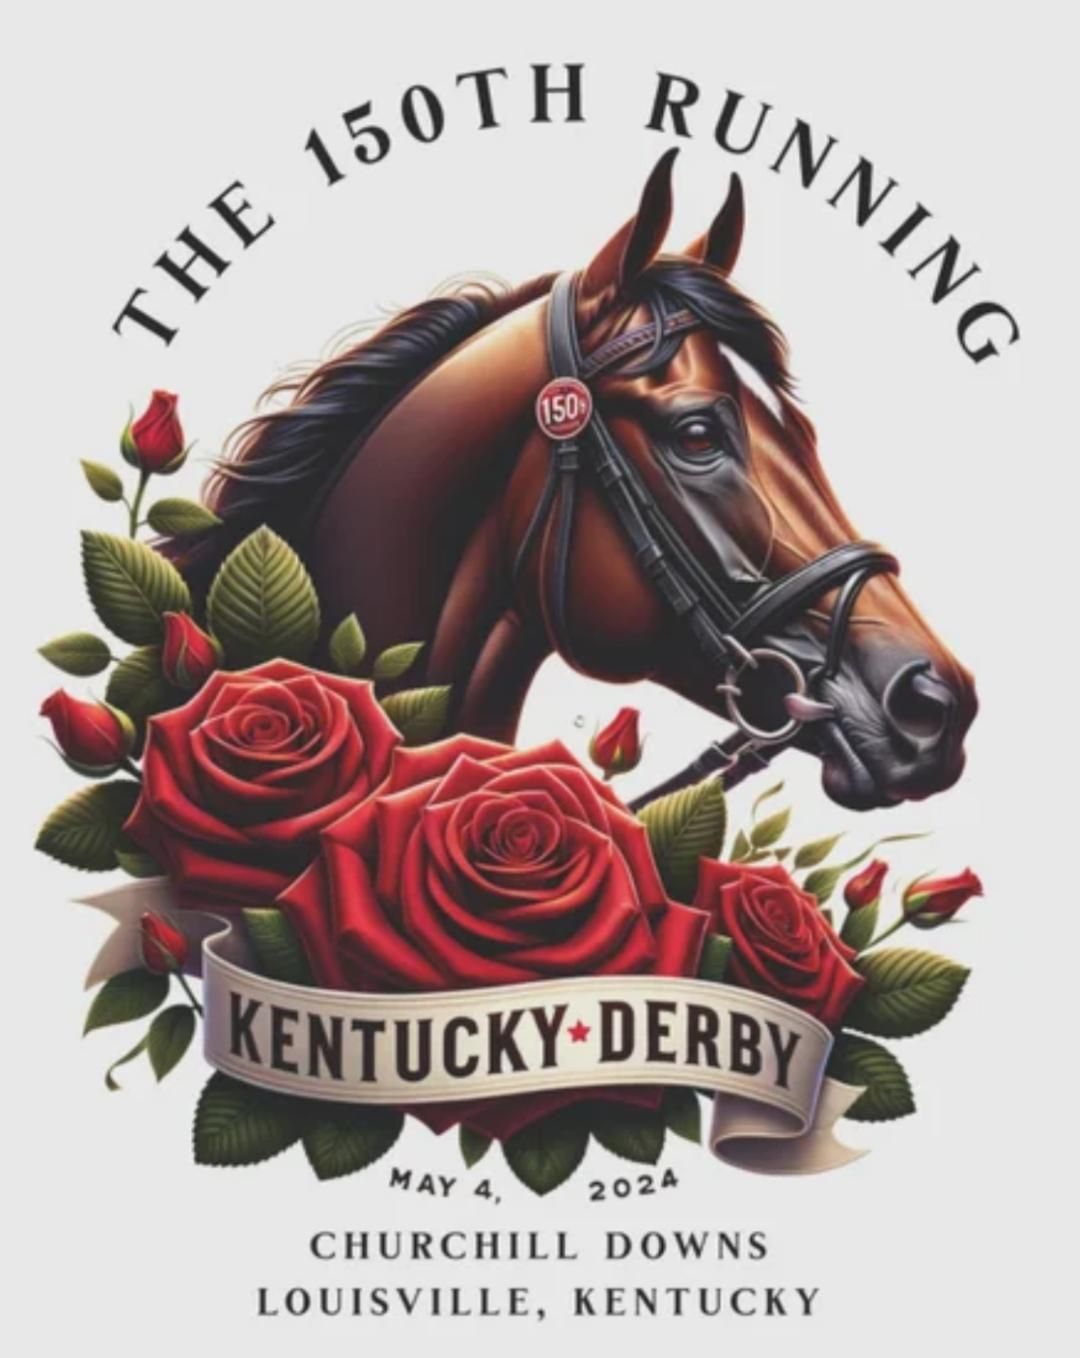 KENTUCKY DERBY PARTY SATURDAY MAY 4, 2024 \u2b50 NO Cover Charge